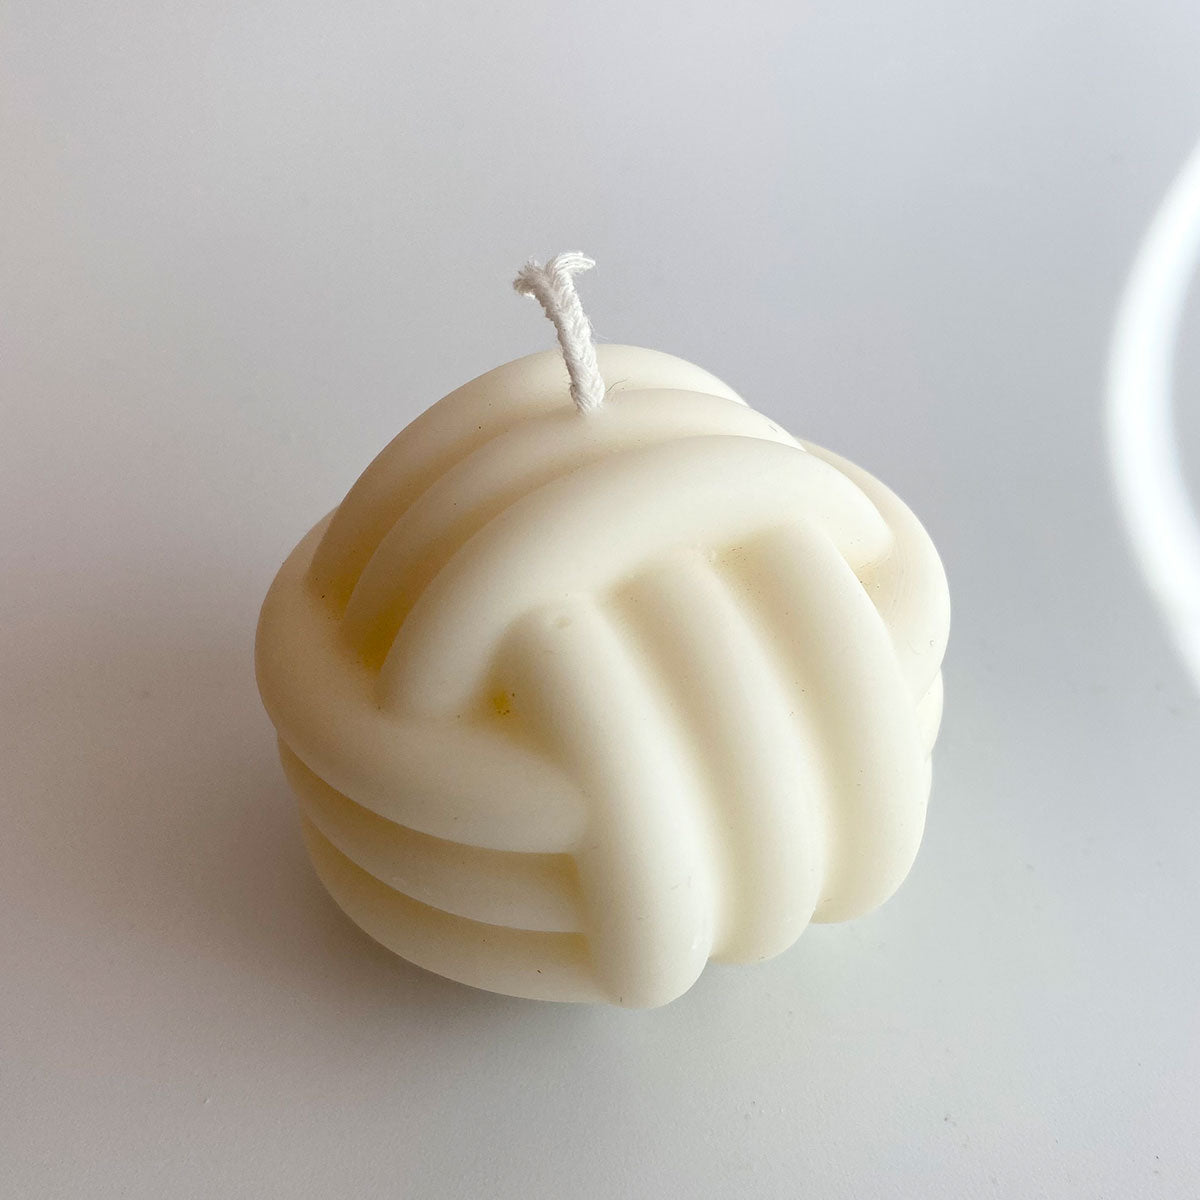 Monkey’s Fist Knot Candle - White